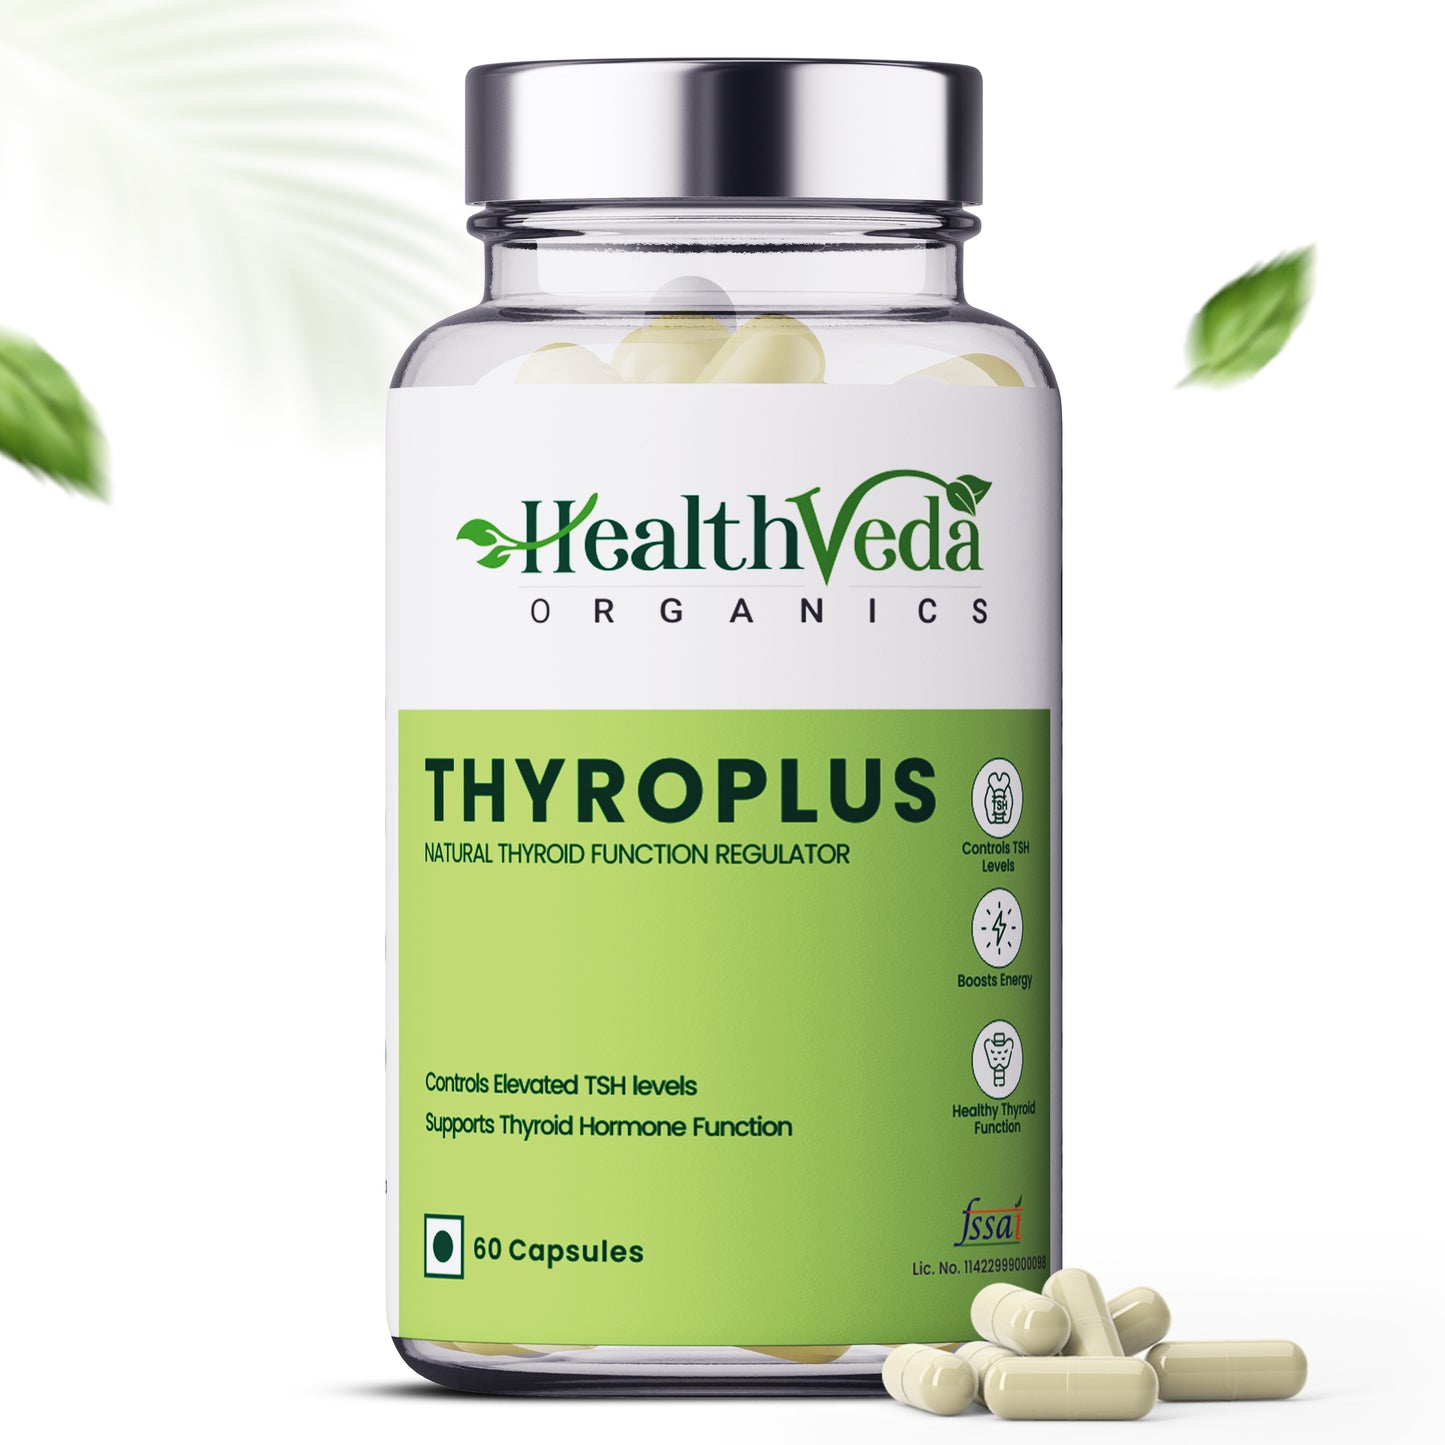 Health Veda Organics Thyroplus Supplements packed with Natural Ingredients for Thyroid Support - 60 Veg Capsules for Men & Women